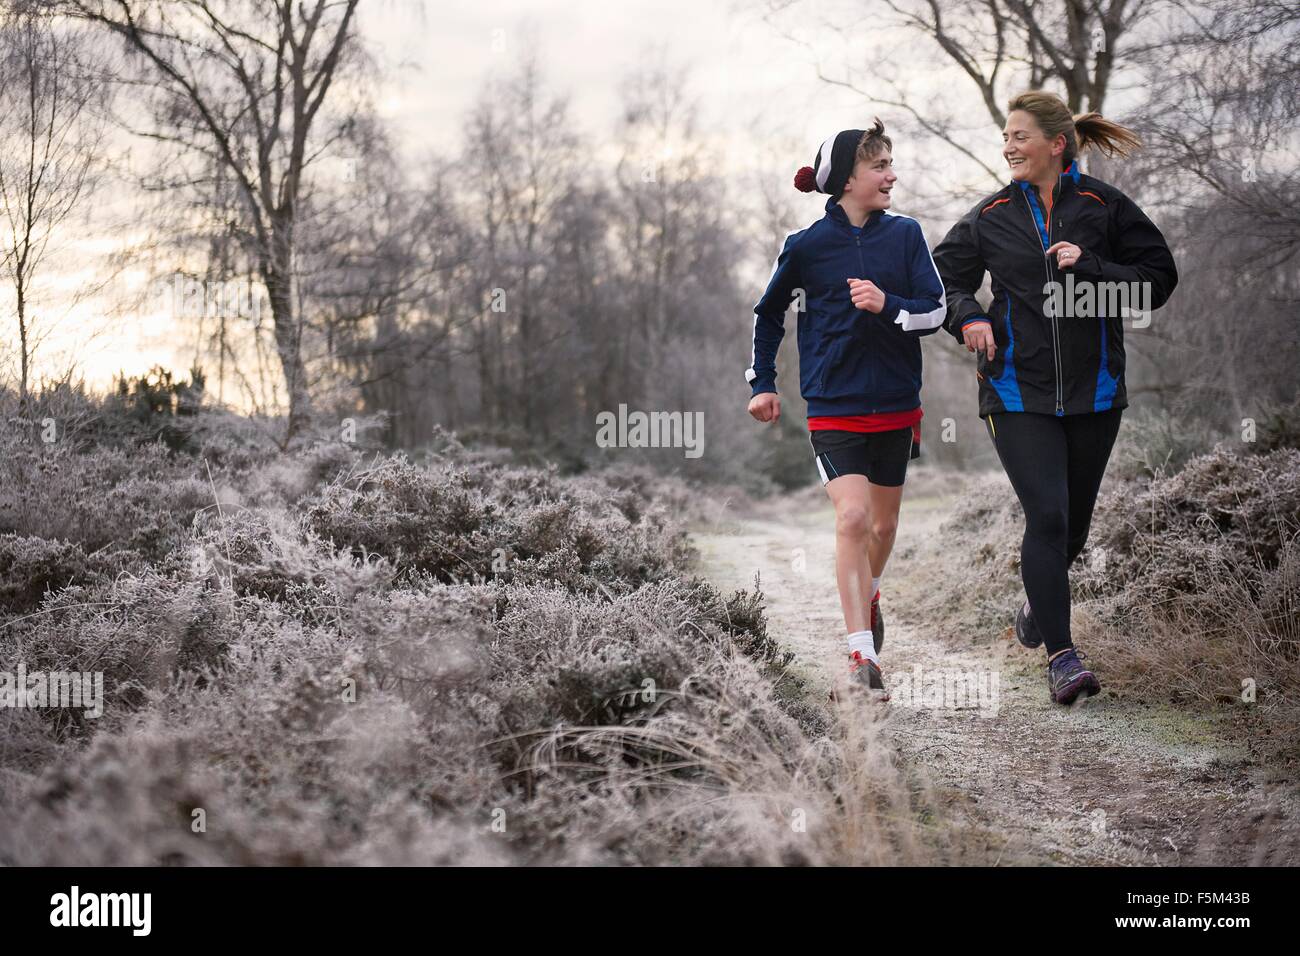 Front view of mother and son running on frosty path face to face smiling Stock Photo